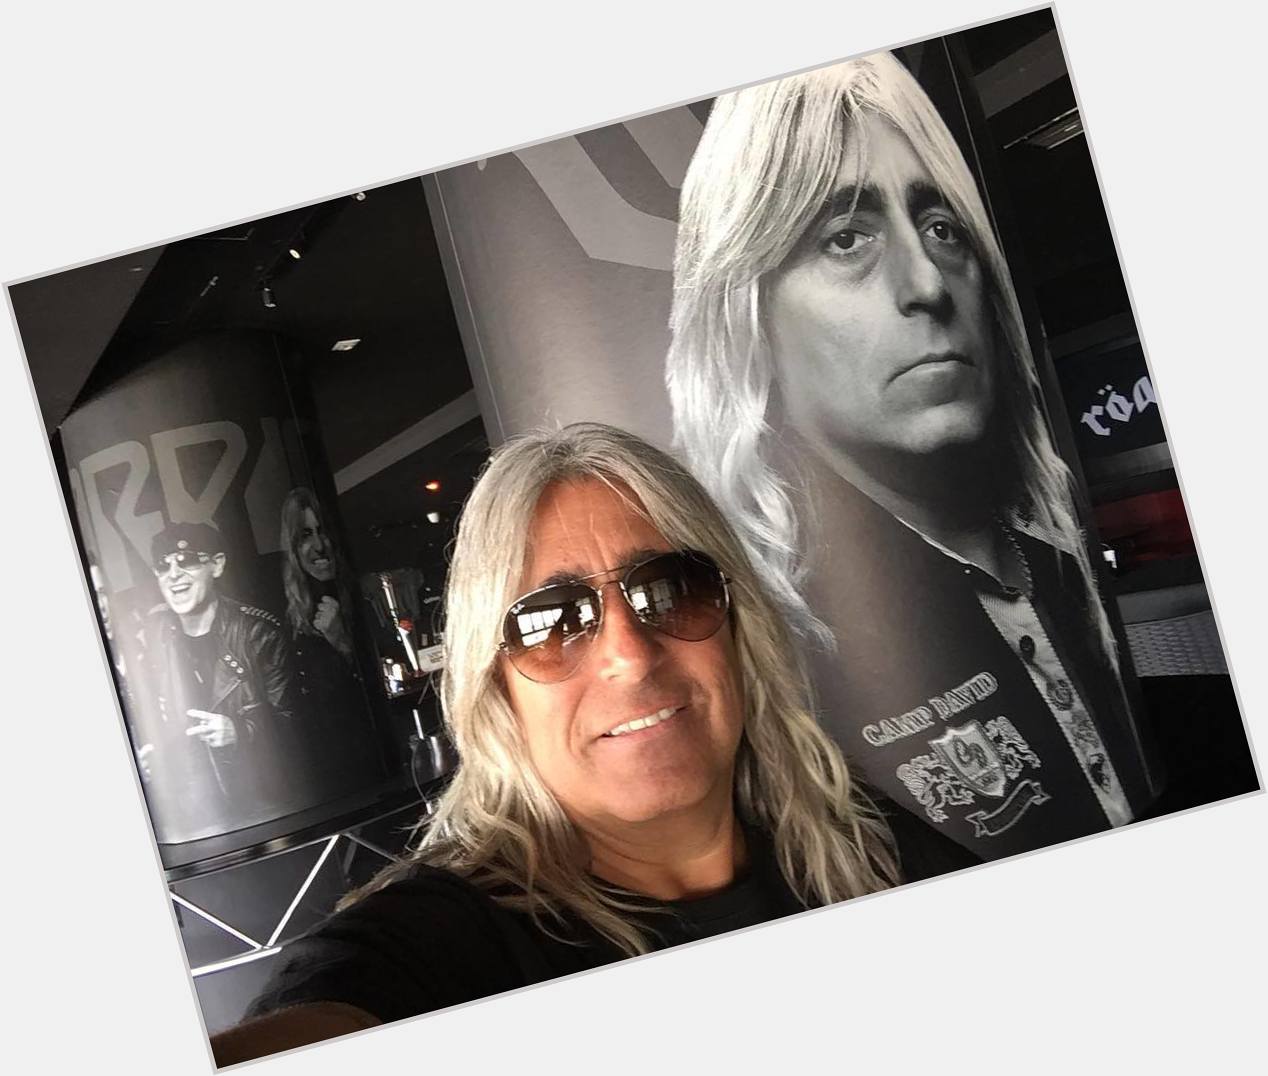 Today we celebrate Mikkeys birthday! Show the man some love!!! HAPPY BIRTHDAY from everyone at Team Mikkey Dee!!!!! 